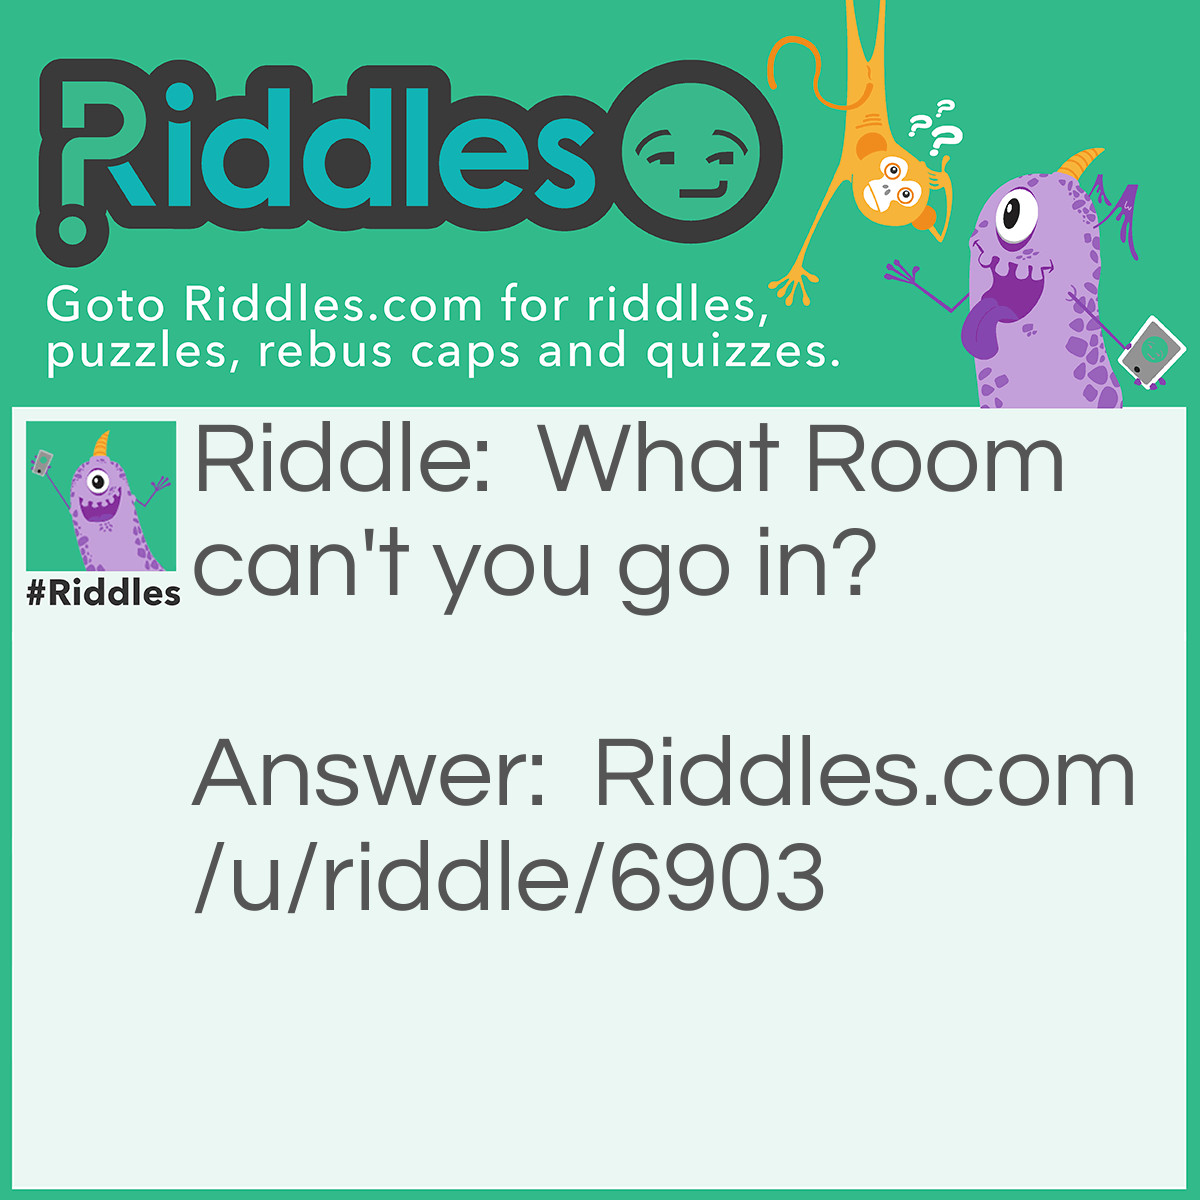 Riddle: What Room can't you go in? Answer: A mushroom.